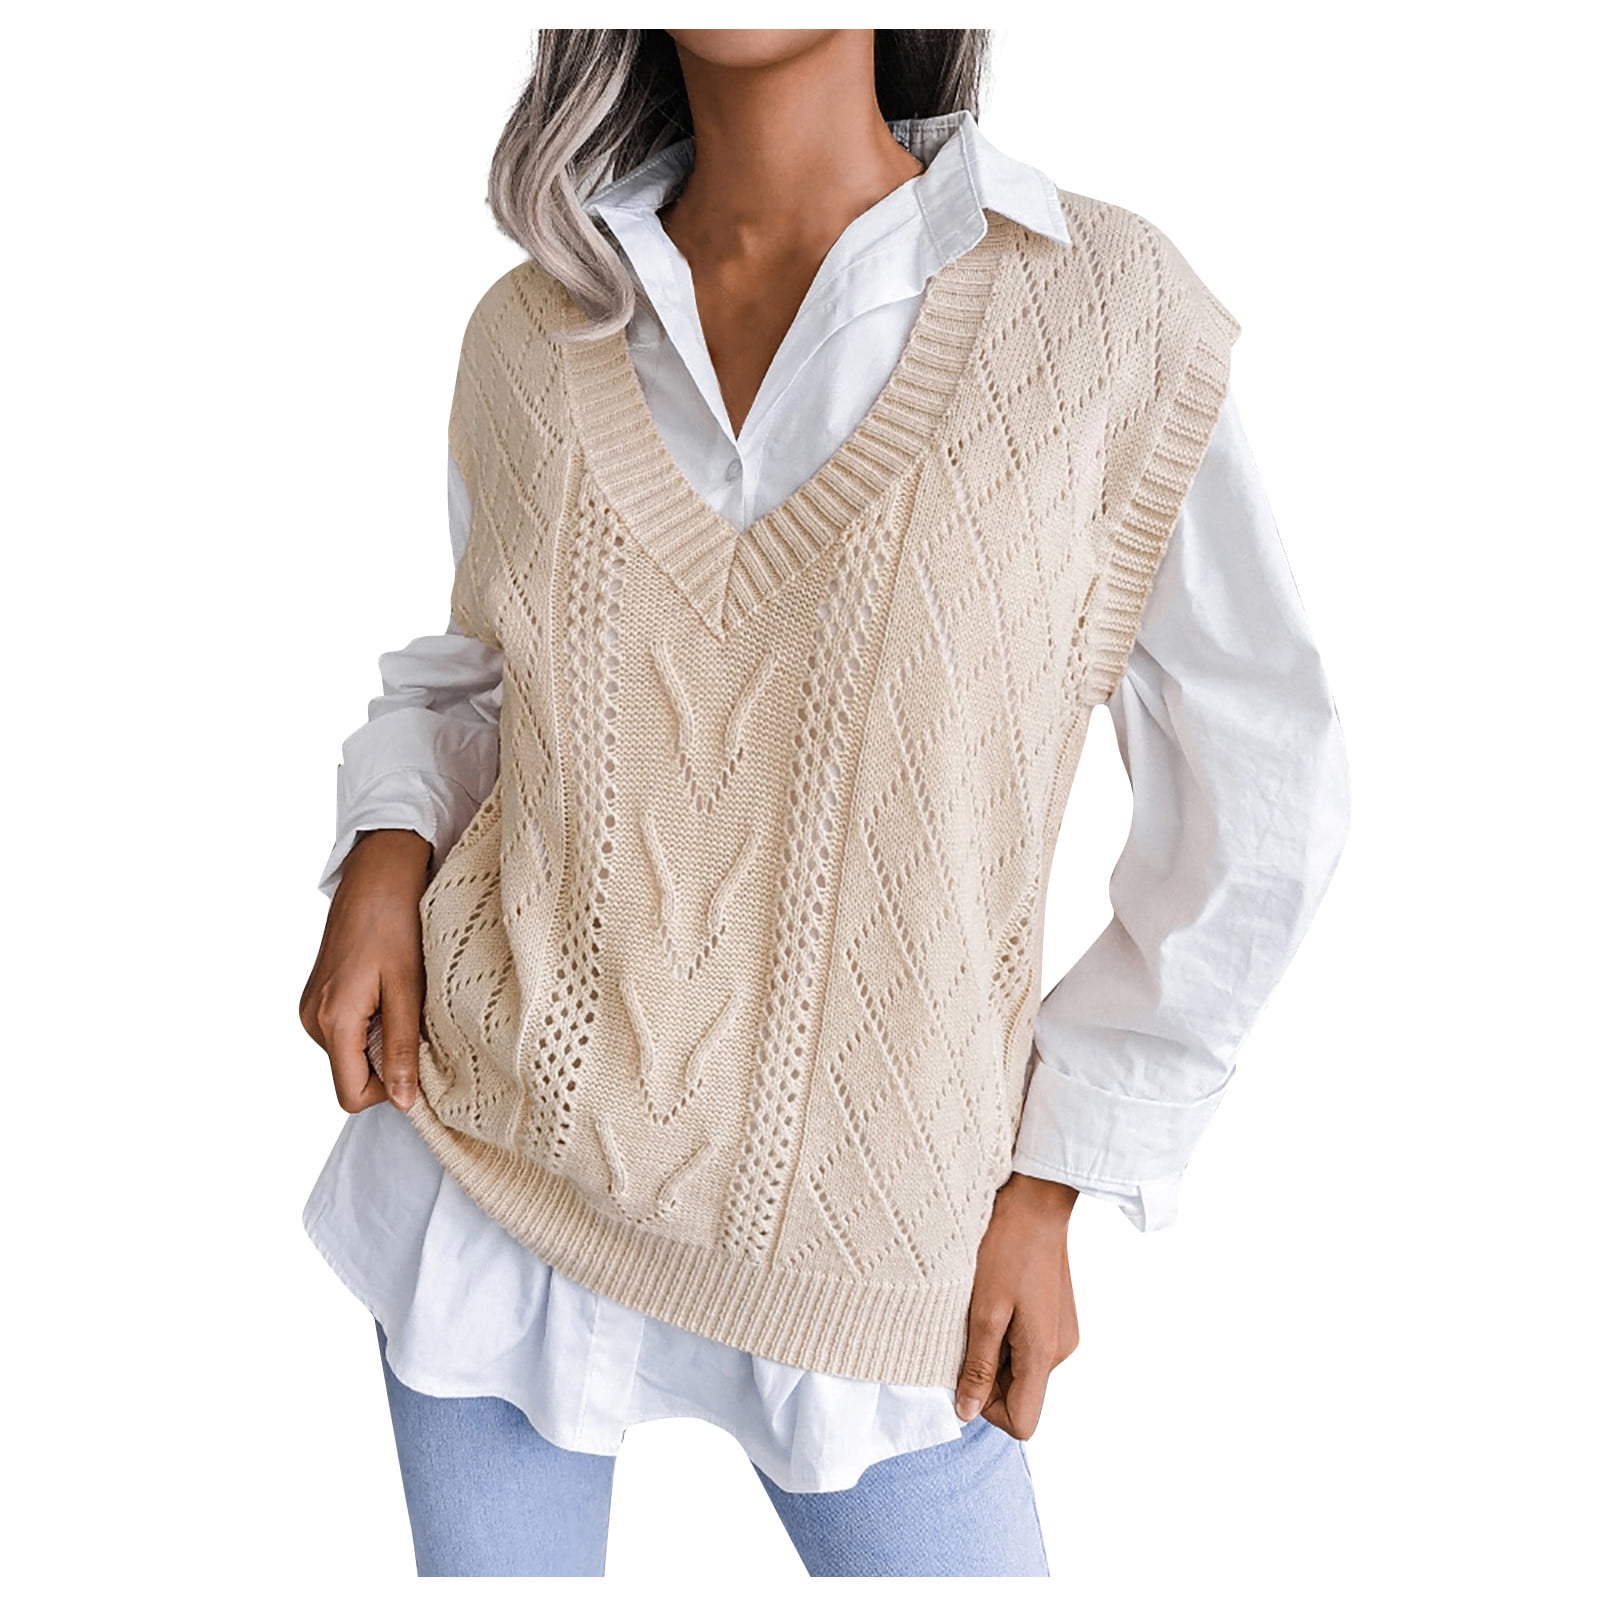 Women's Aesthetic Clothes V-Neck Casual Loose Knit Sweater Vest Vests ...